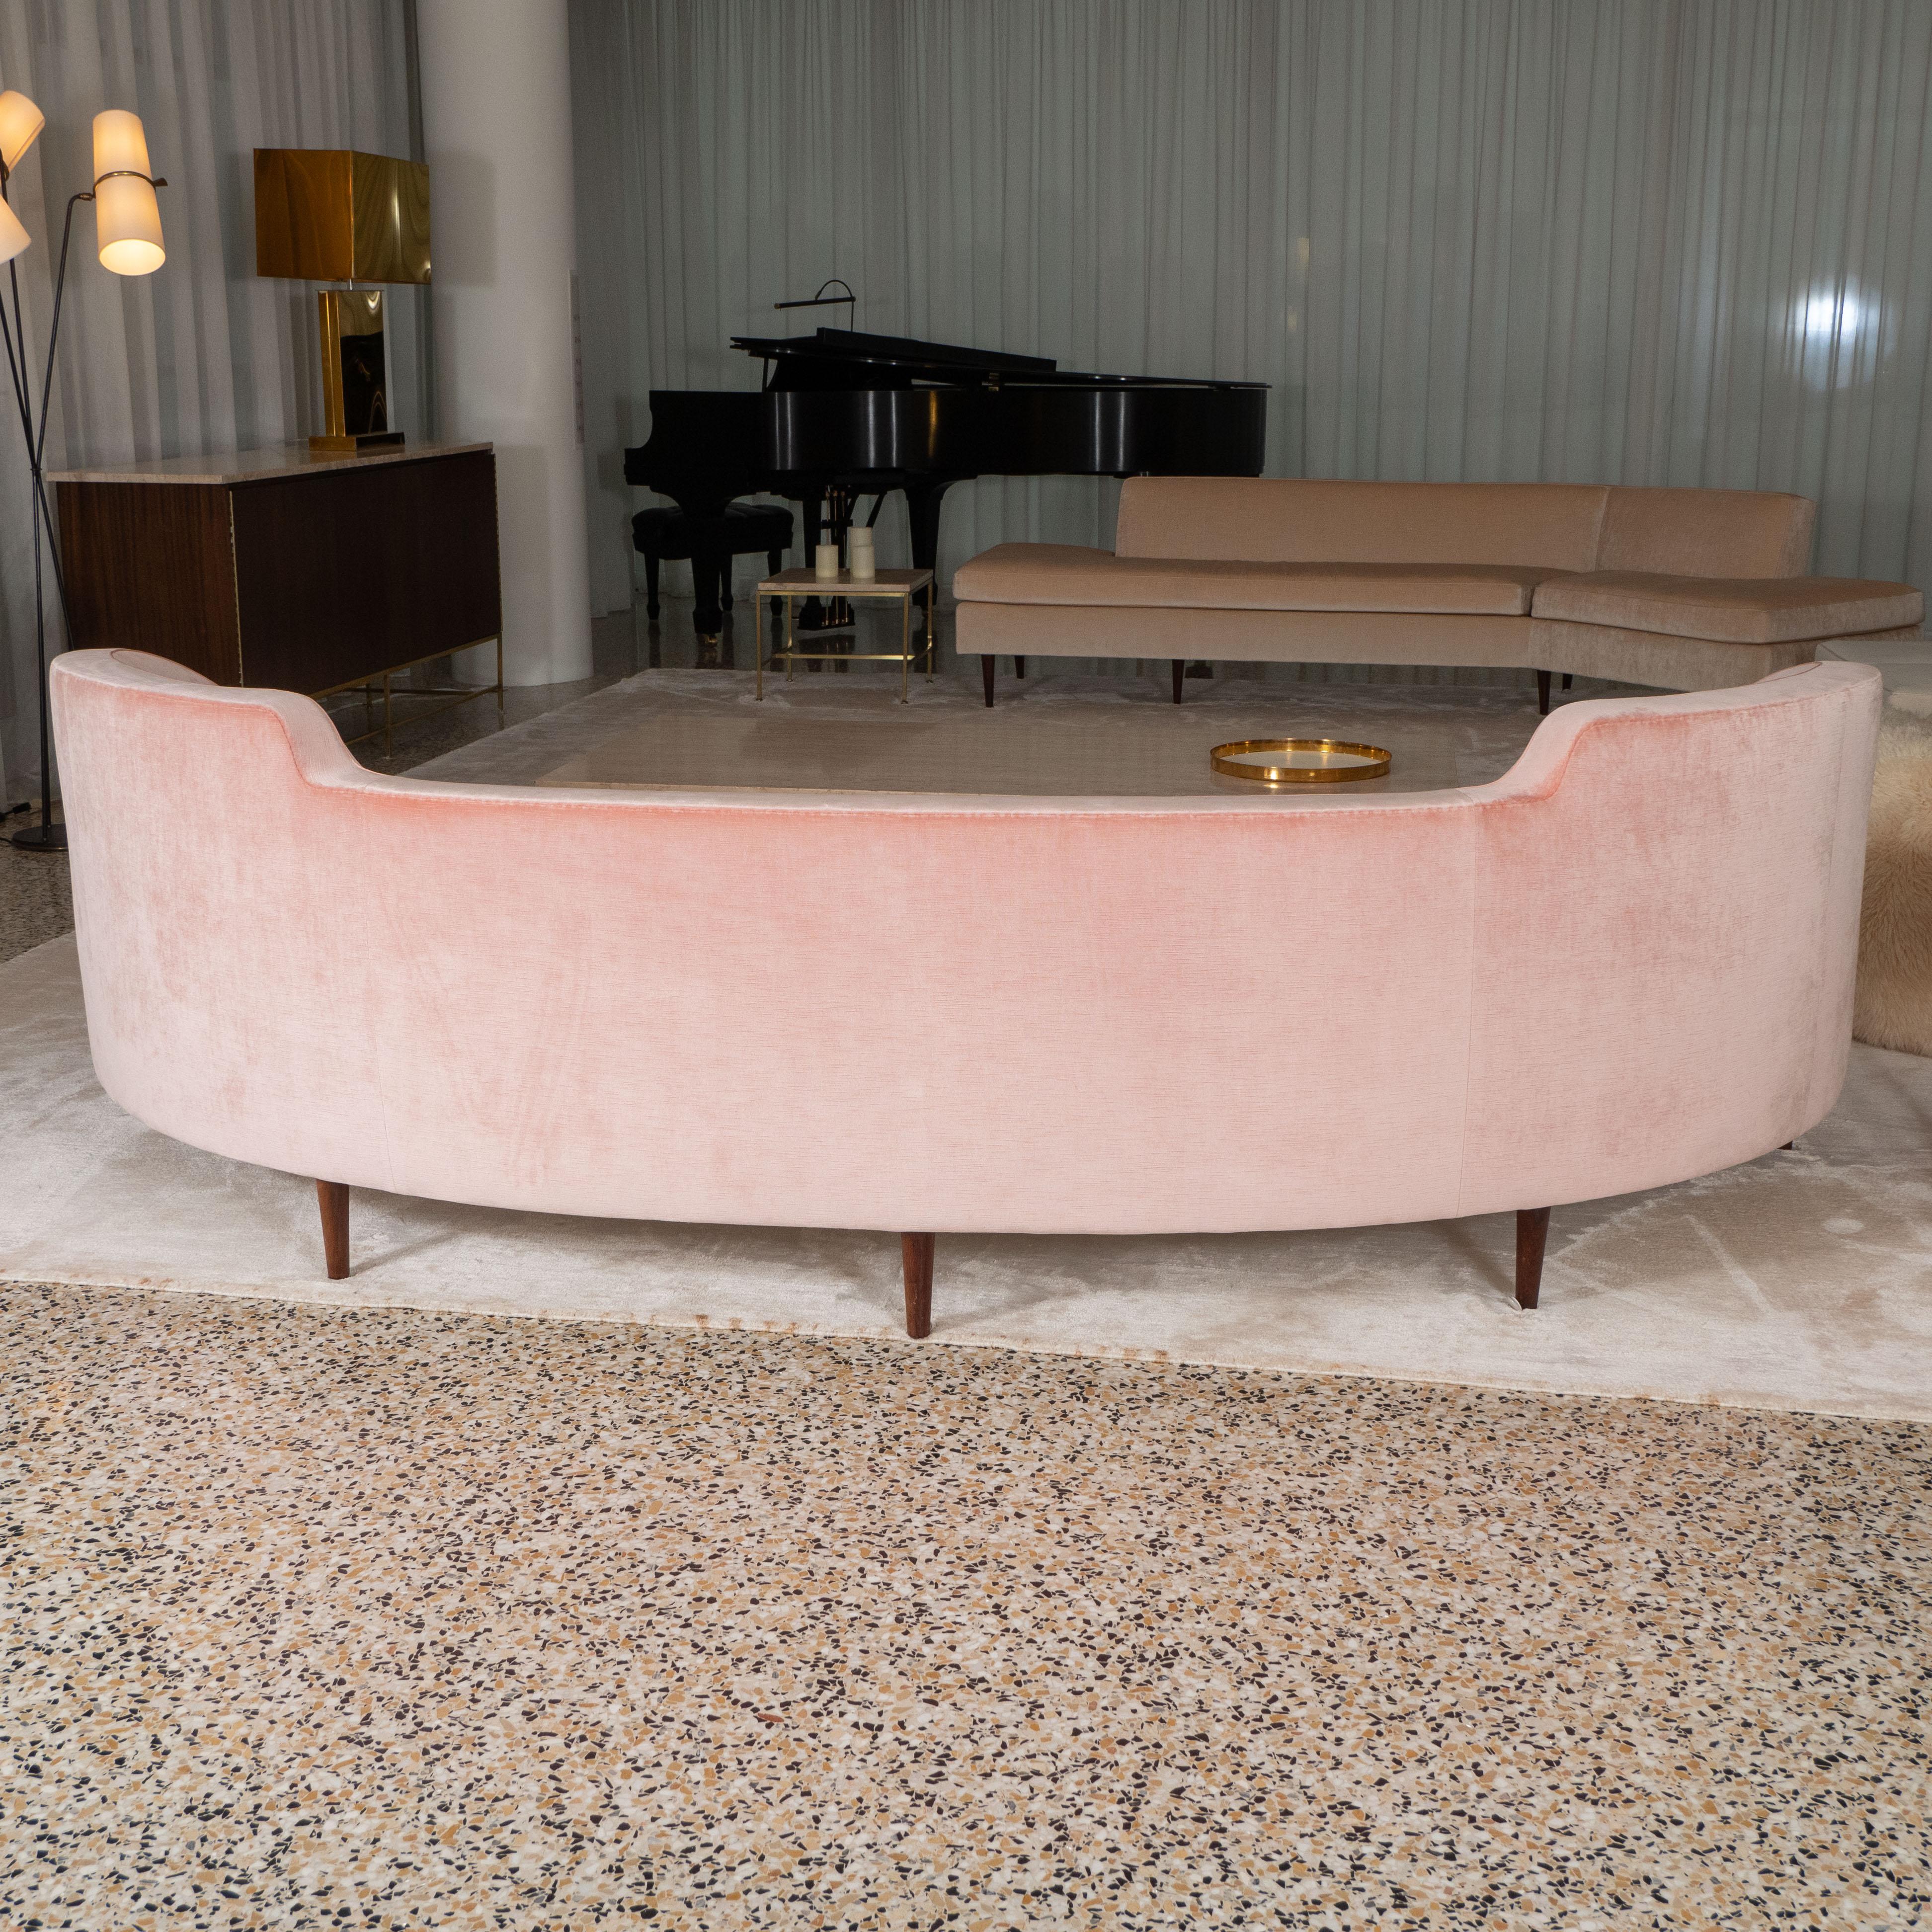 A vintage Oasis curved sofa designed by Edward Wormley for Dunbar. USA, circa 1950.

Recently re-upholstered in pink mohair.

